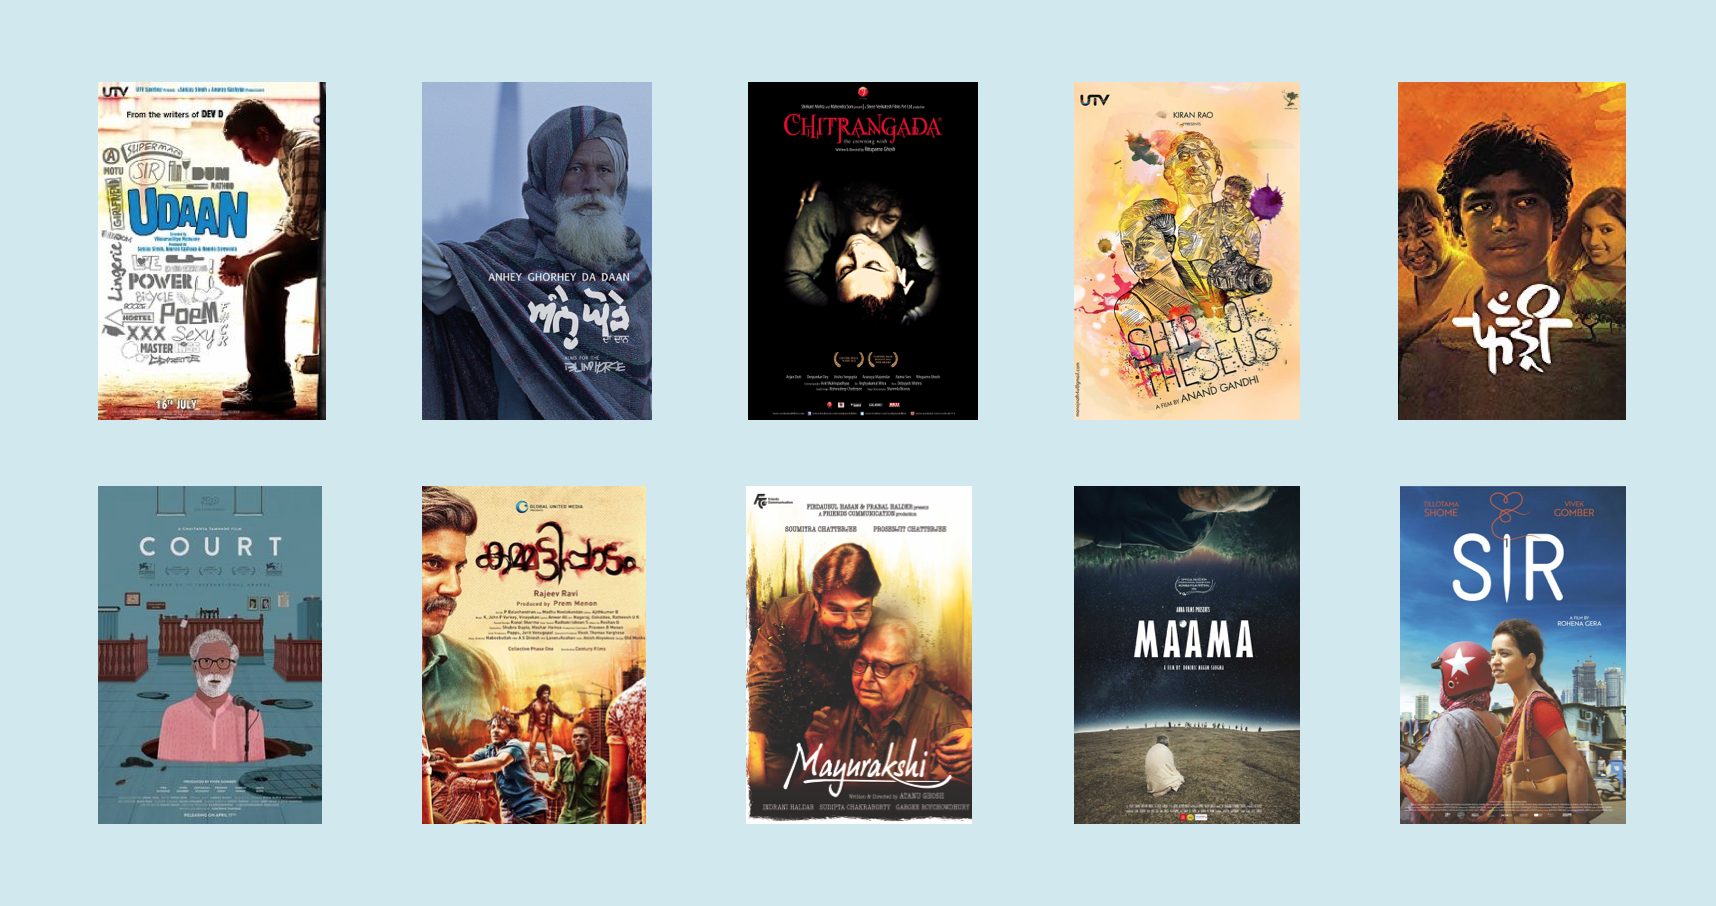 The Indian Films of the Decade